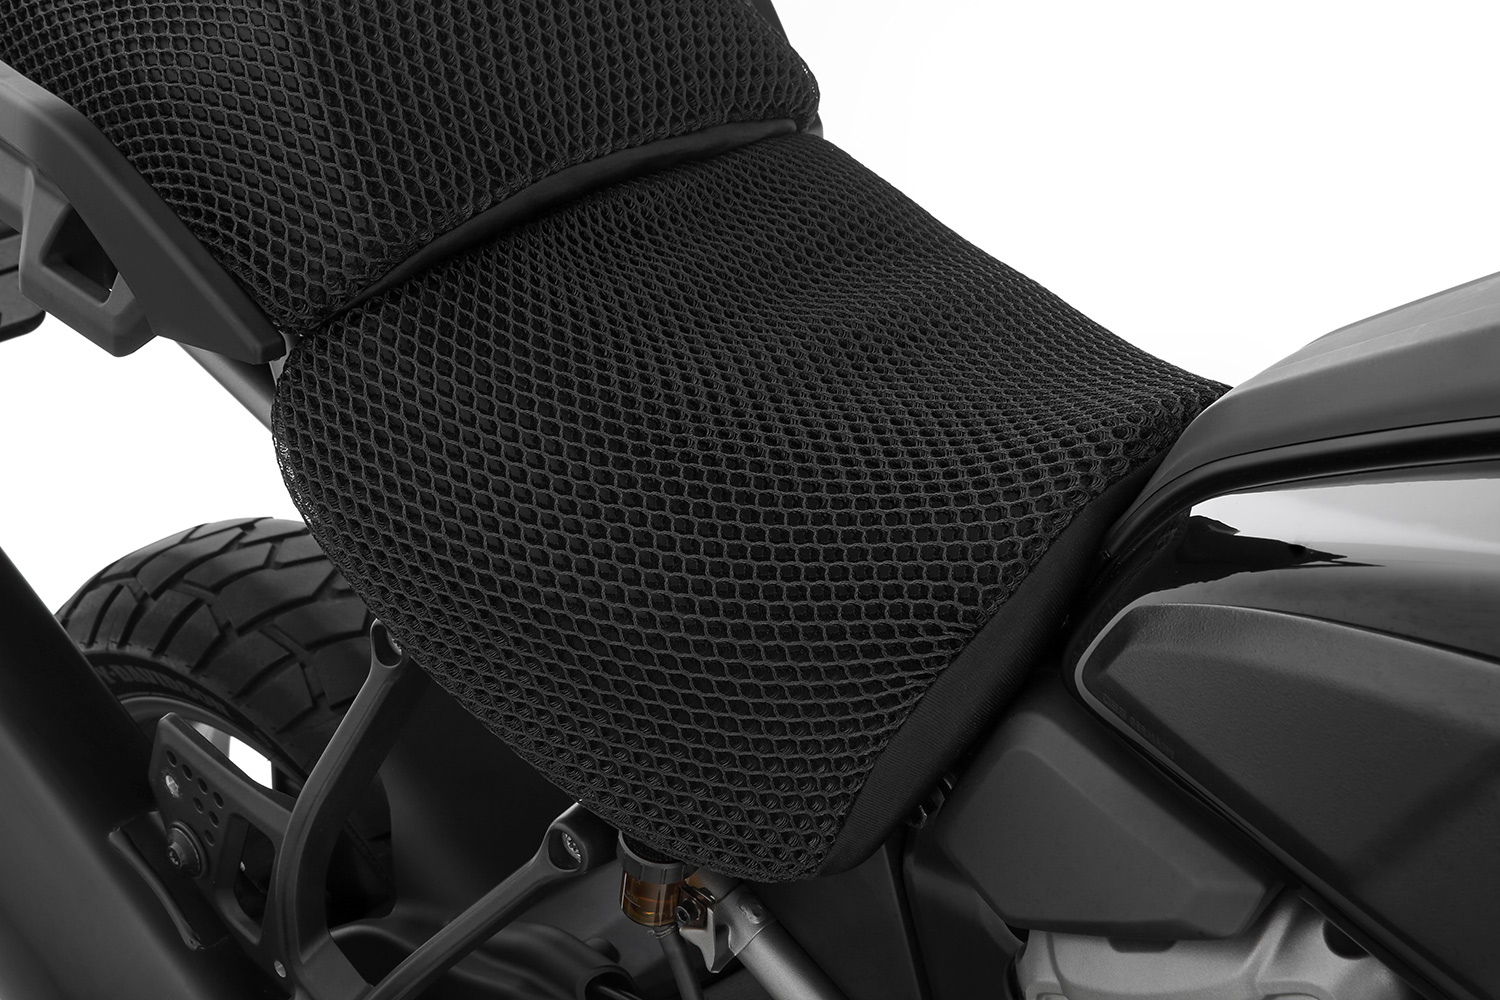 First look: Cool Covers motorcycle seat cover - Adventure Bike Rider